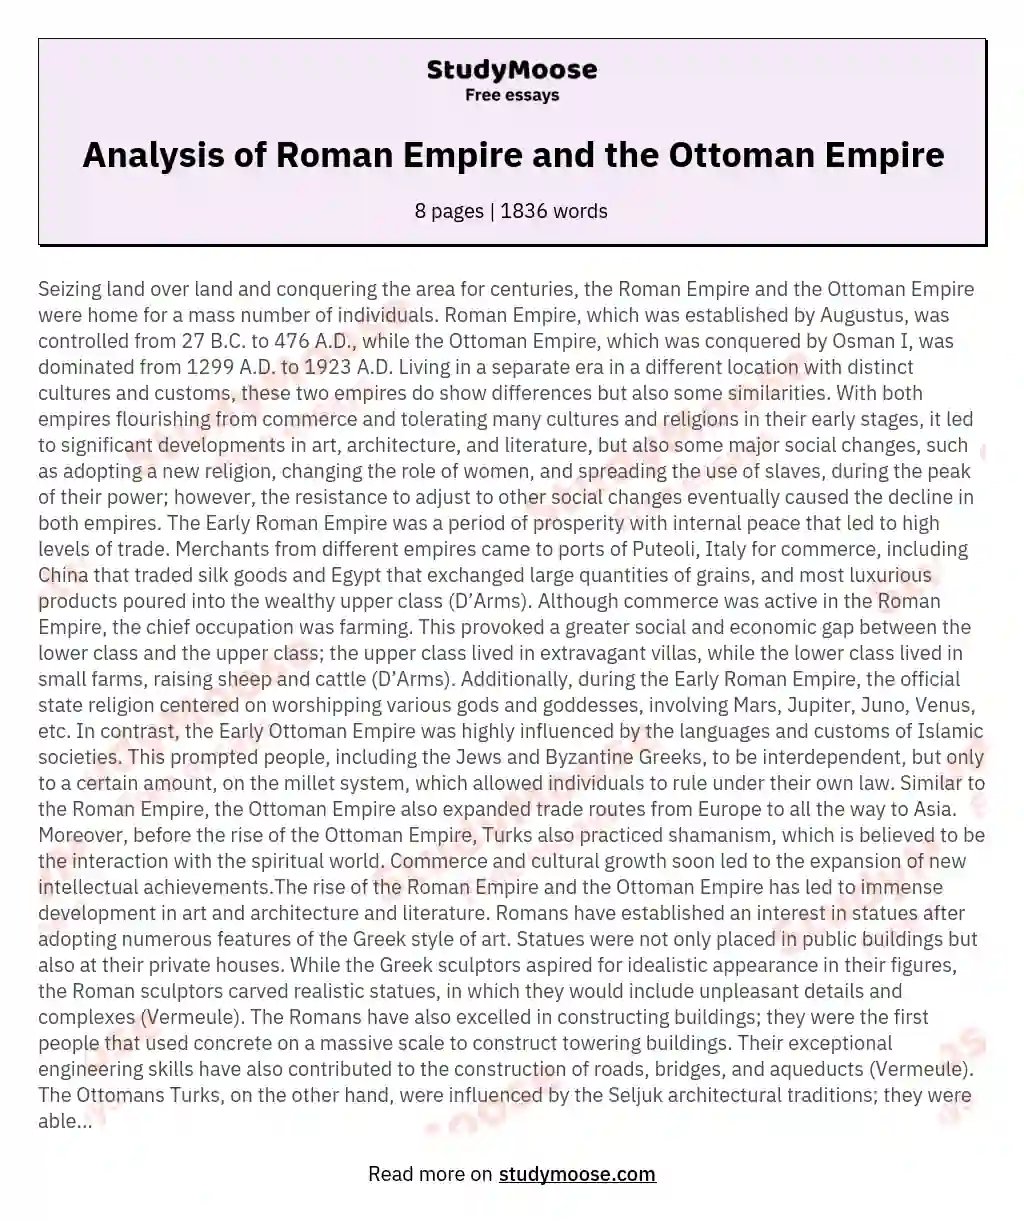 Analysis of Roman Empire and the Ottoman Empire